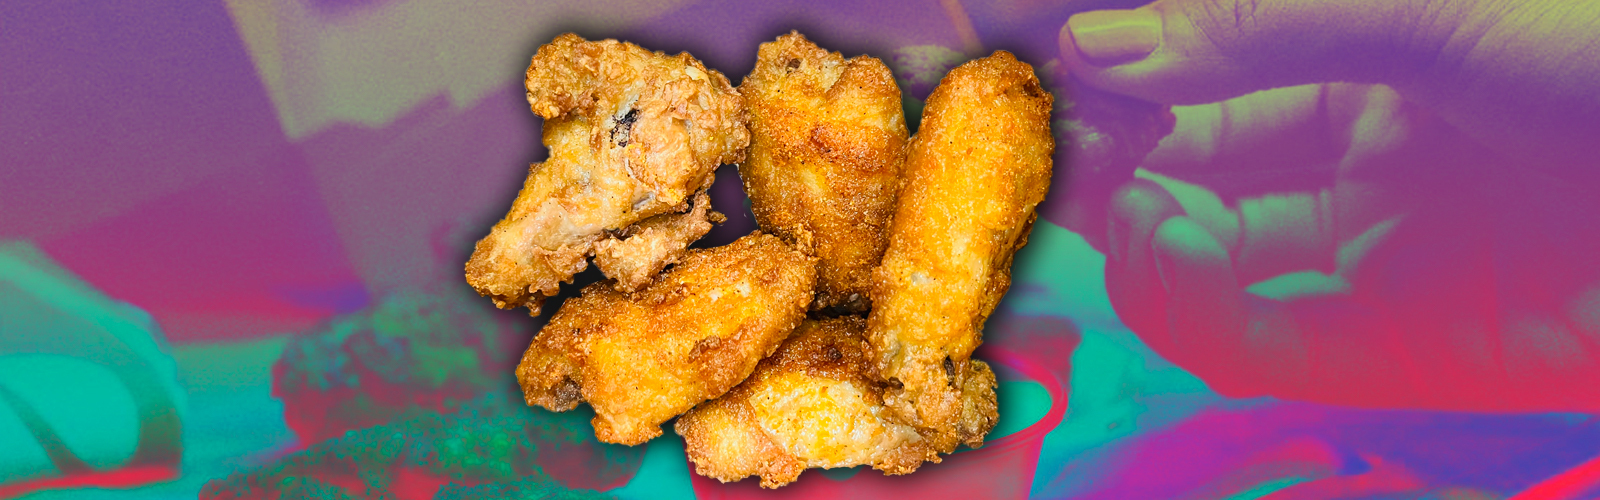 Food Review Are Taco Bell’s Crispy Chicken Wings Worth Tracking Down